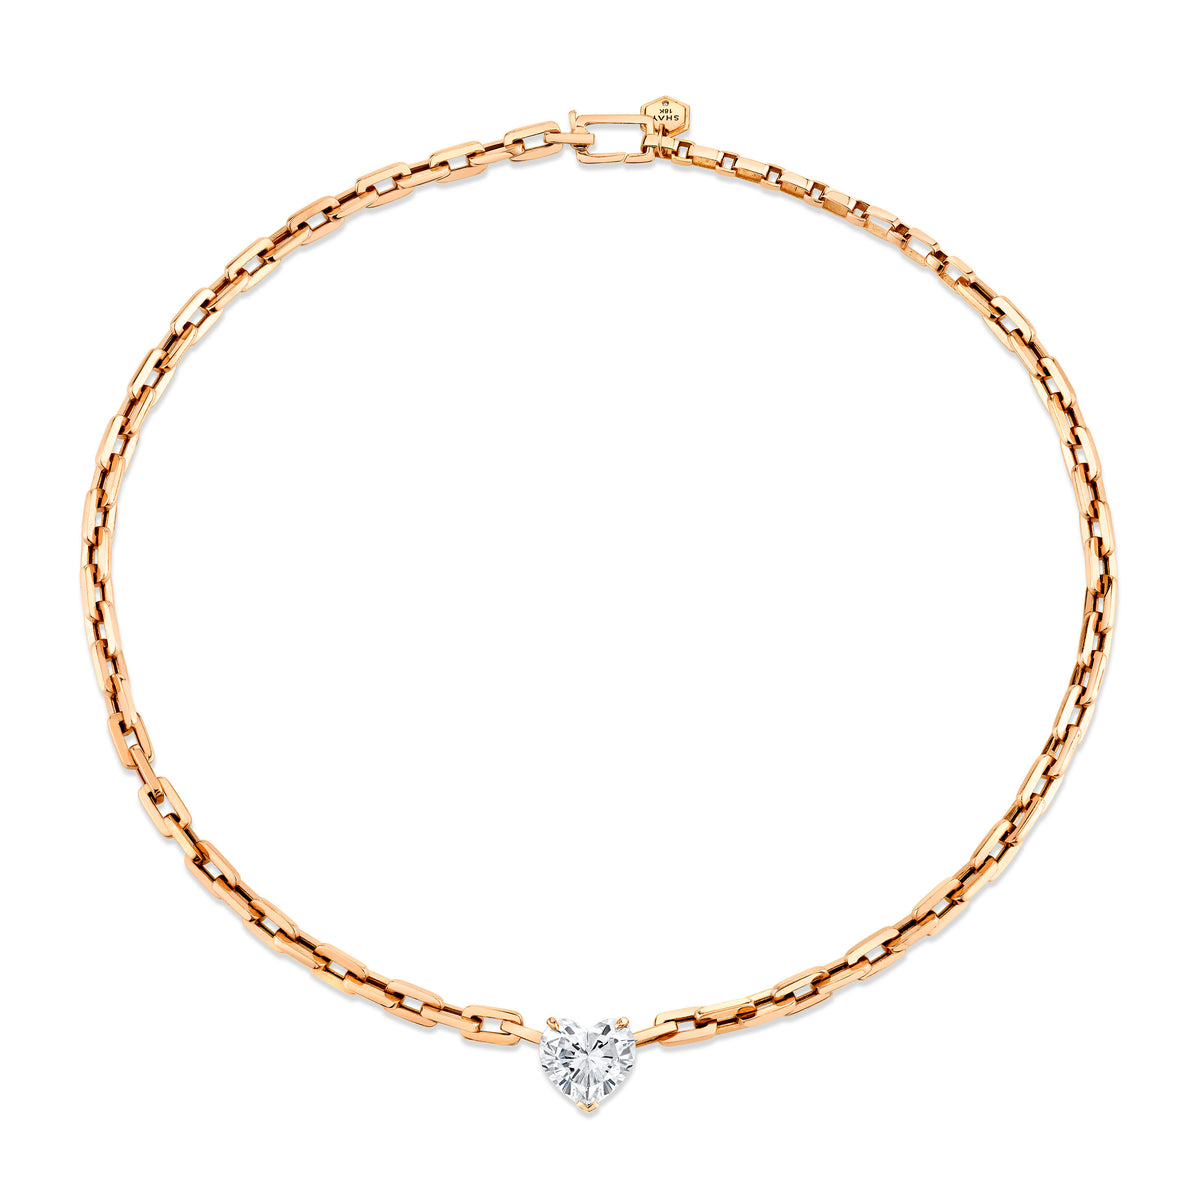 DIAMOND HEART SOLID GOLD DECO LINK NECKLACE